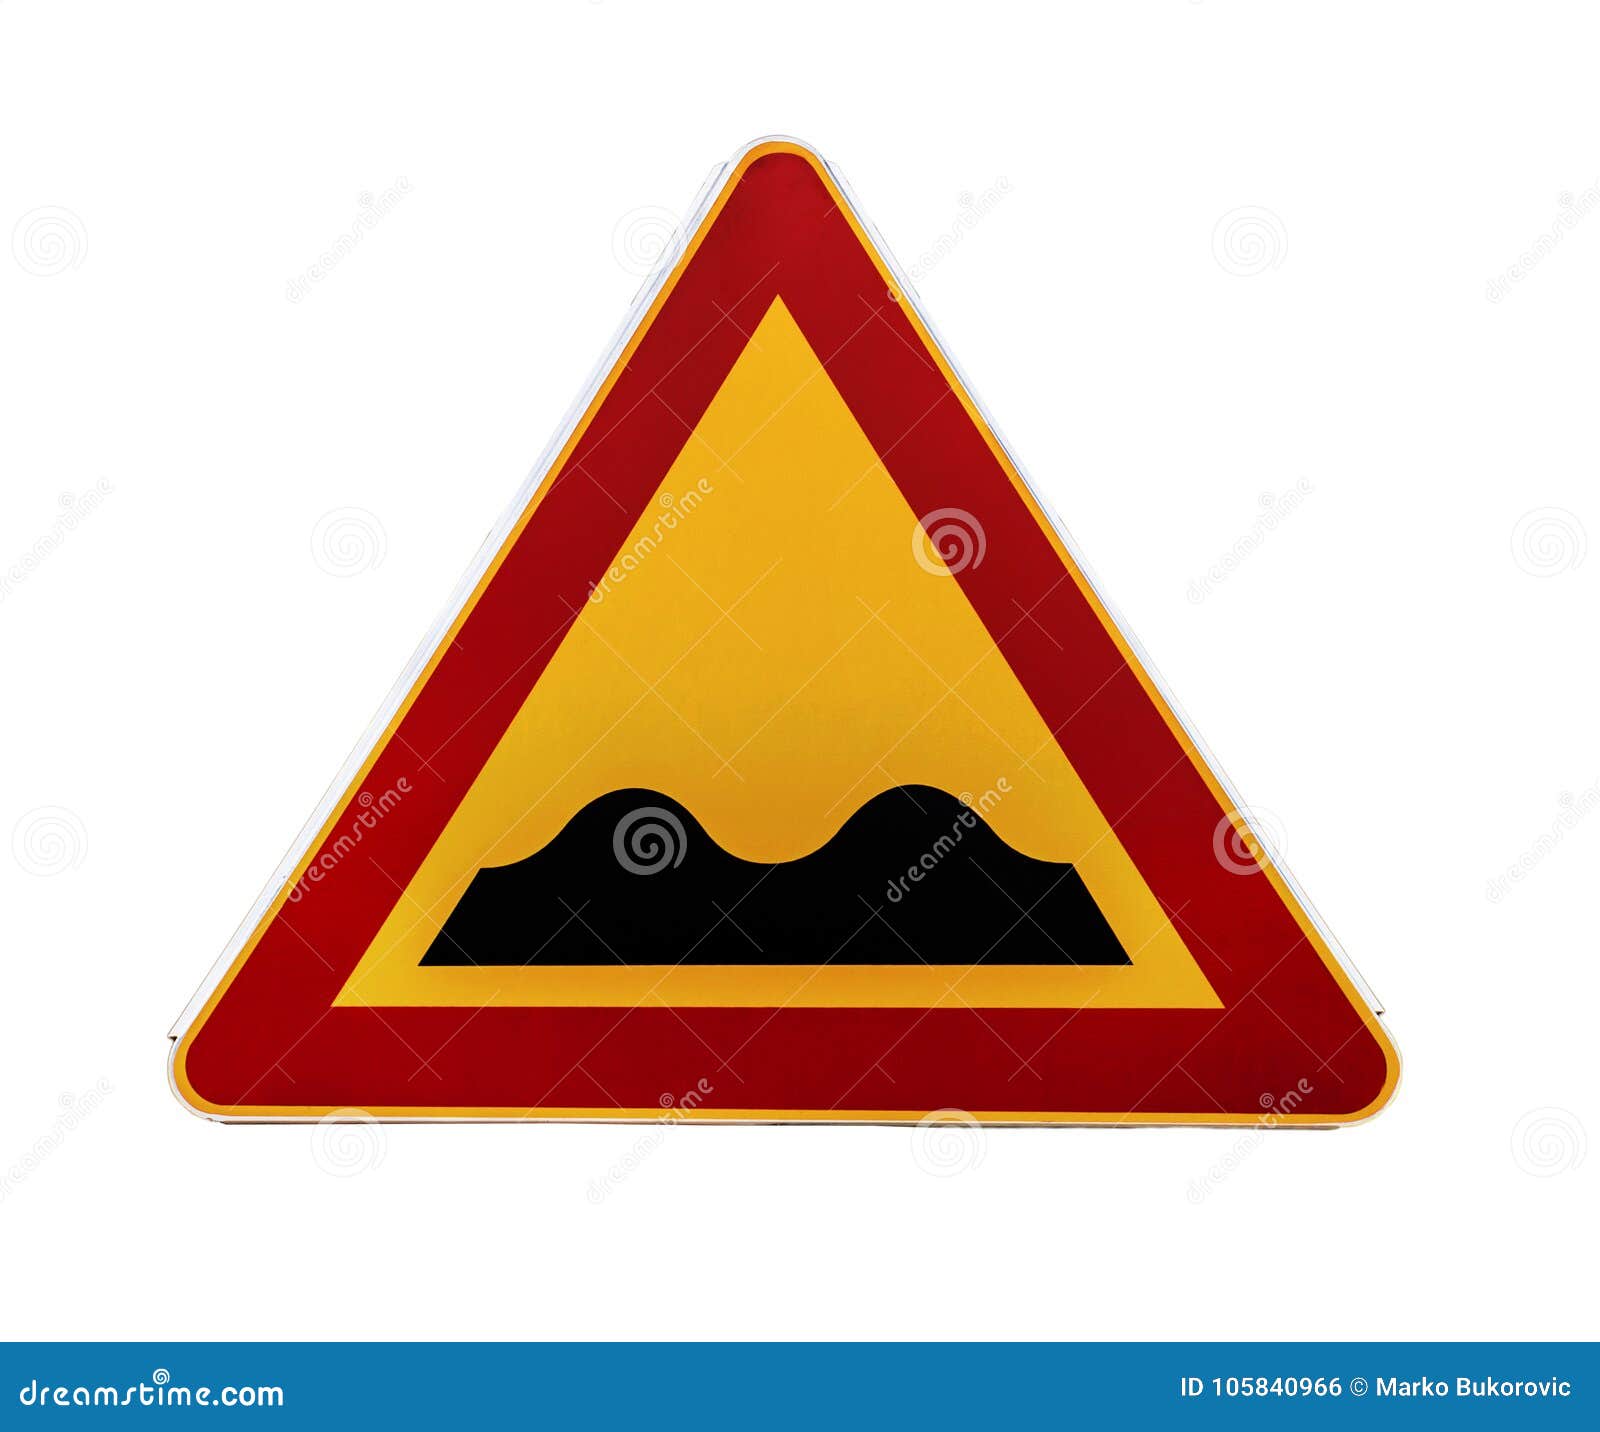 Red And Yellow Triangular Warning Road Sign With A Warning Of A Bumpy Road Ahead Stock Photo Image Of Careful Bumpy